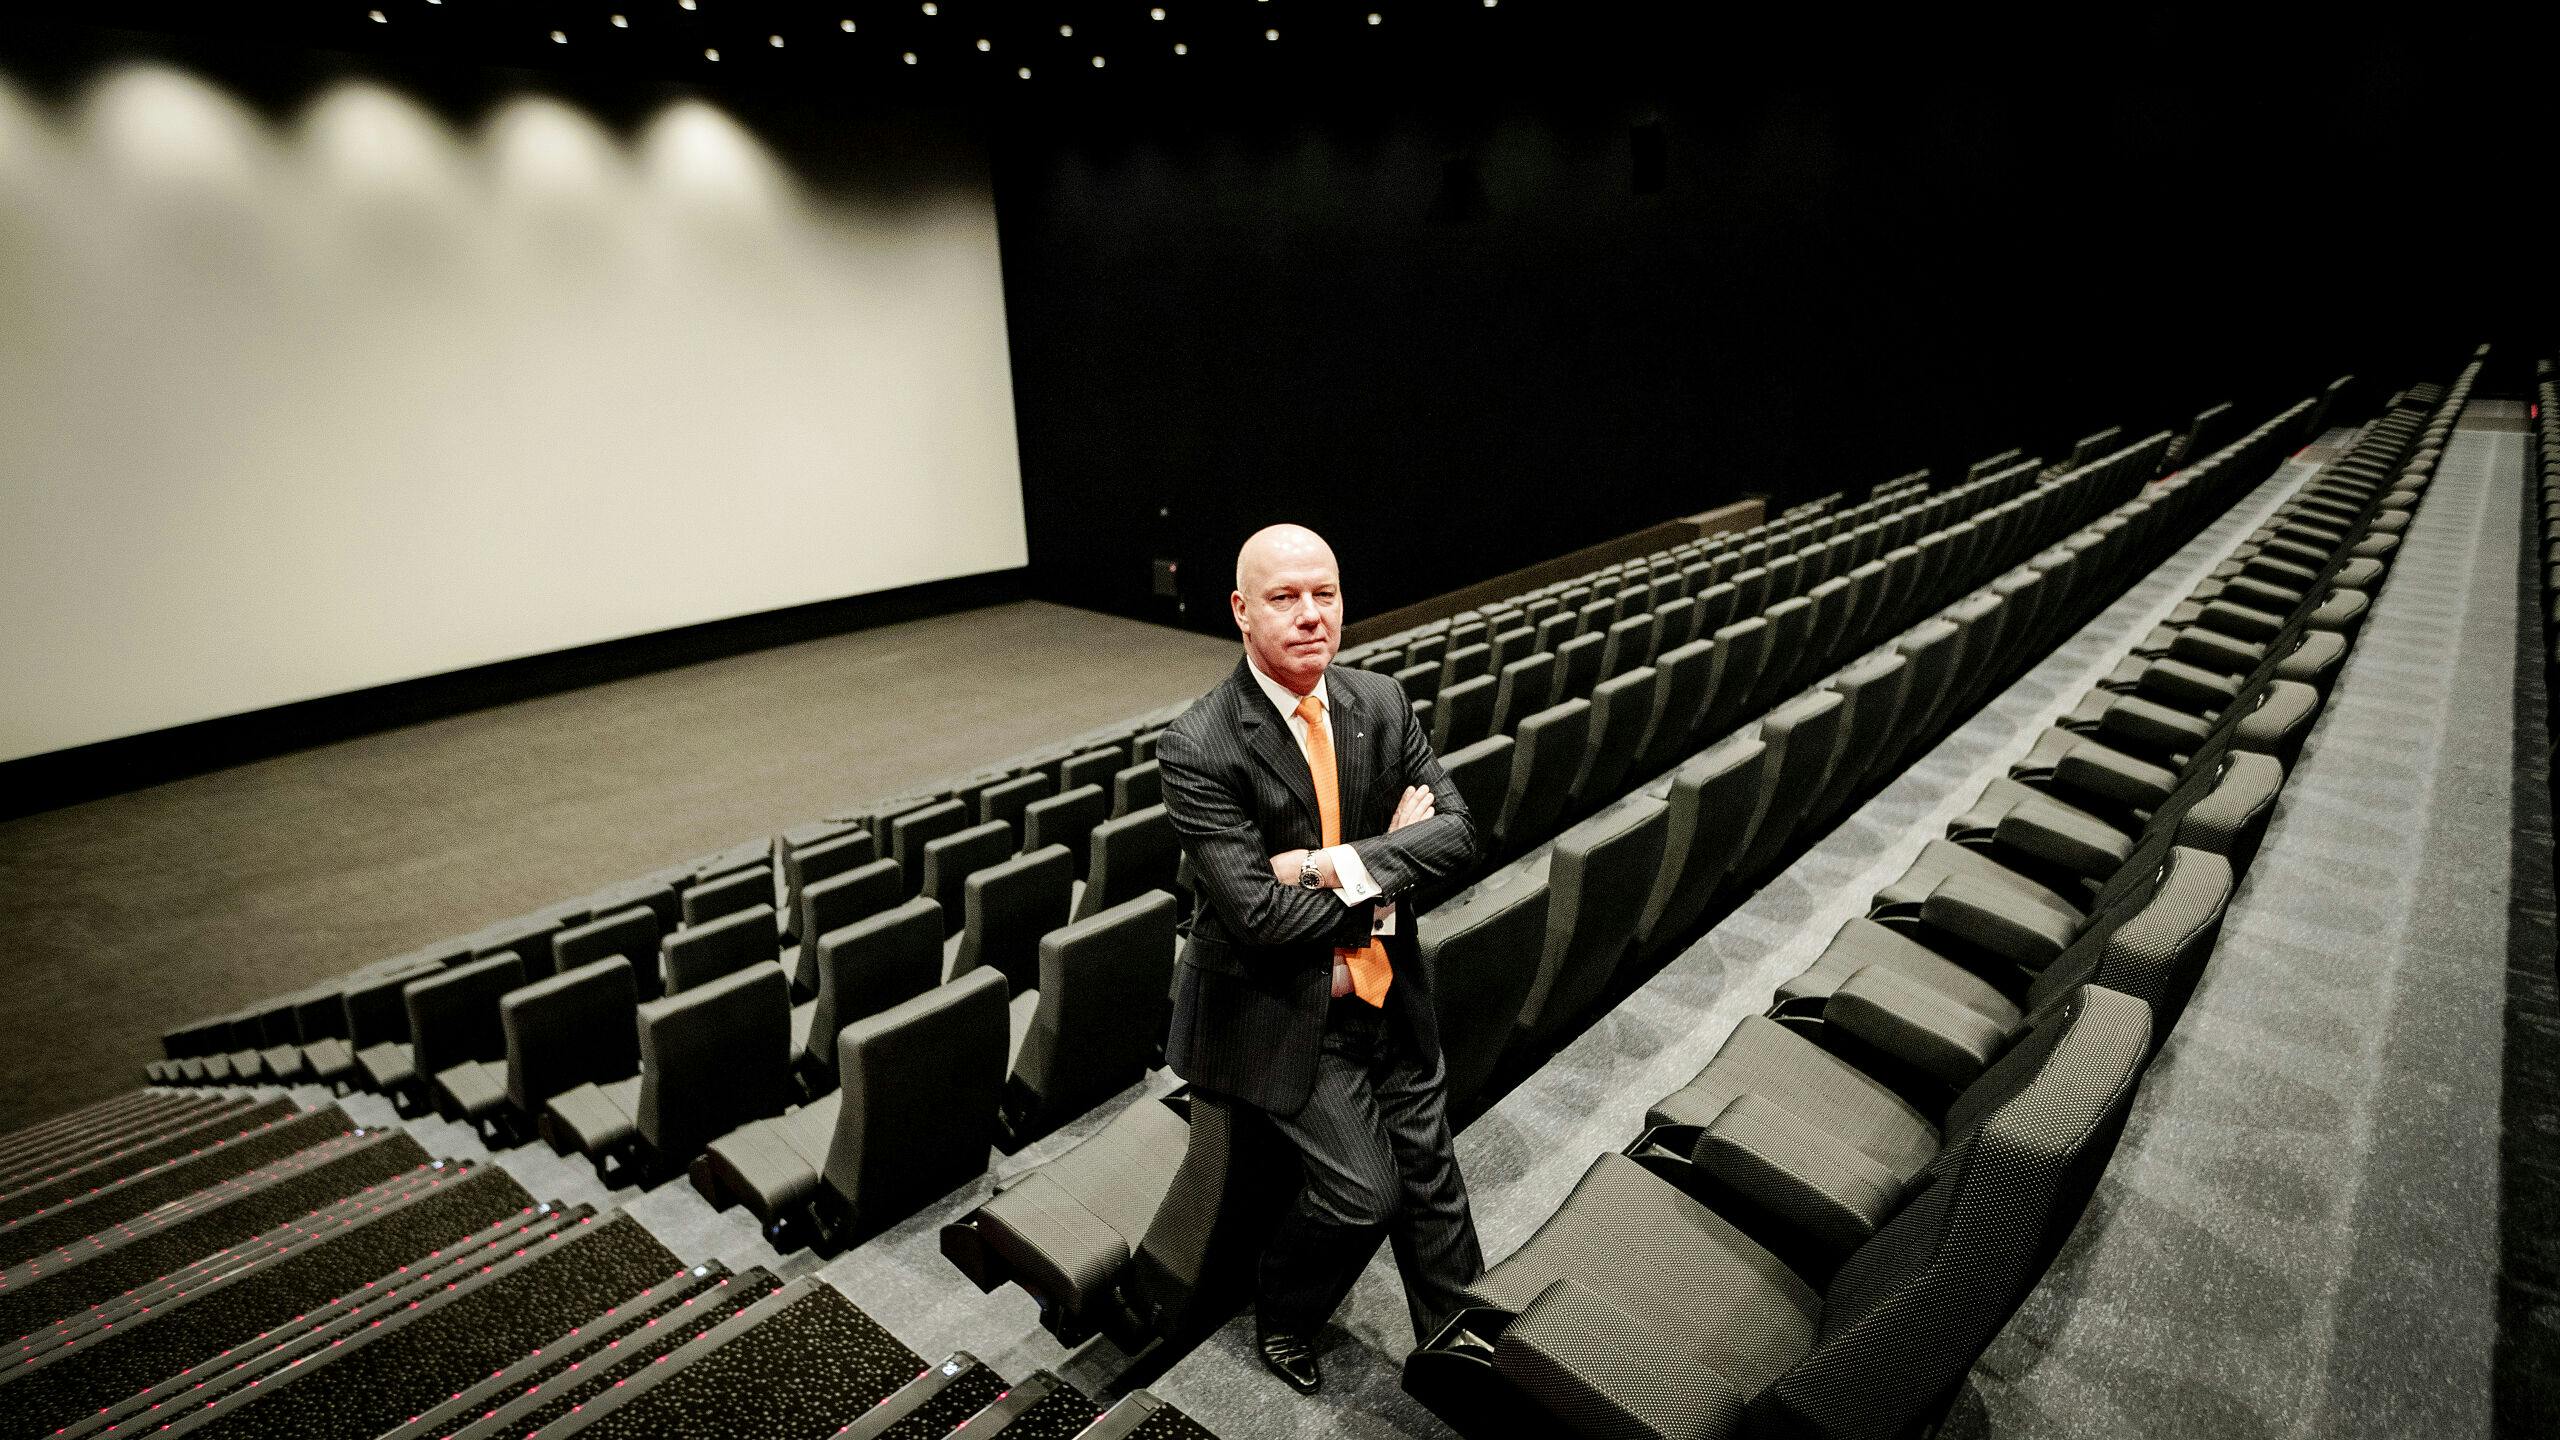 Portret Eddy Duquenne, CEO Kinepolis Group